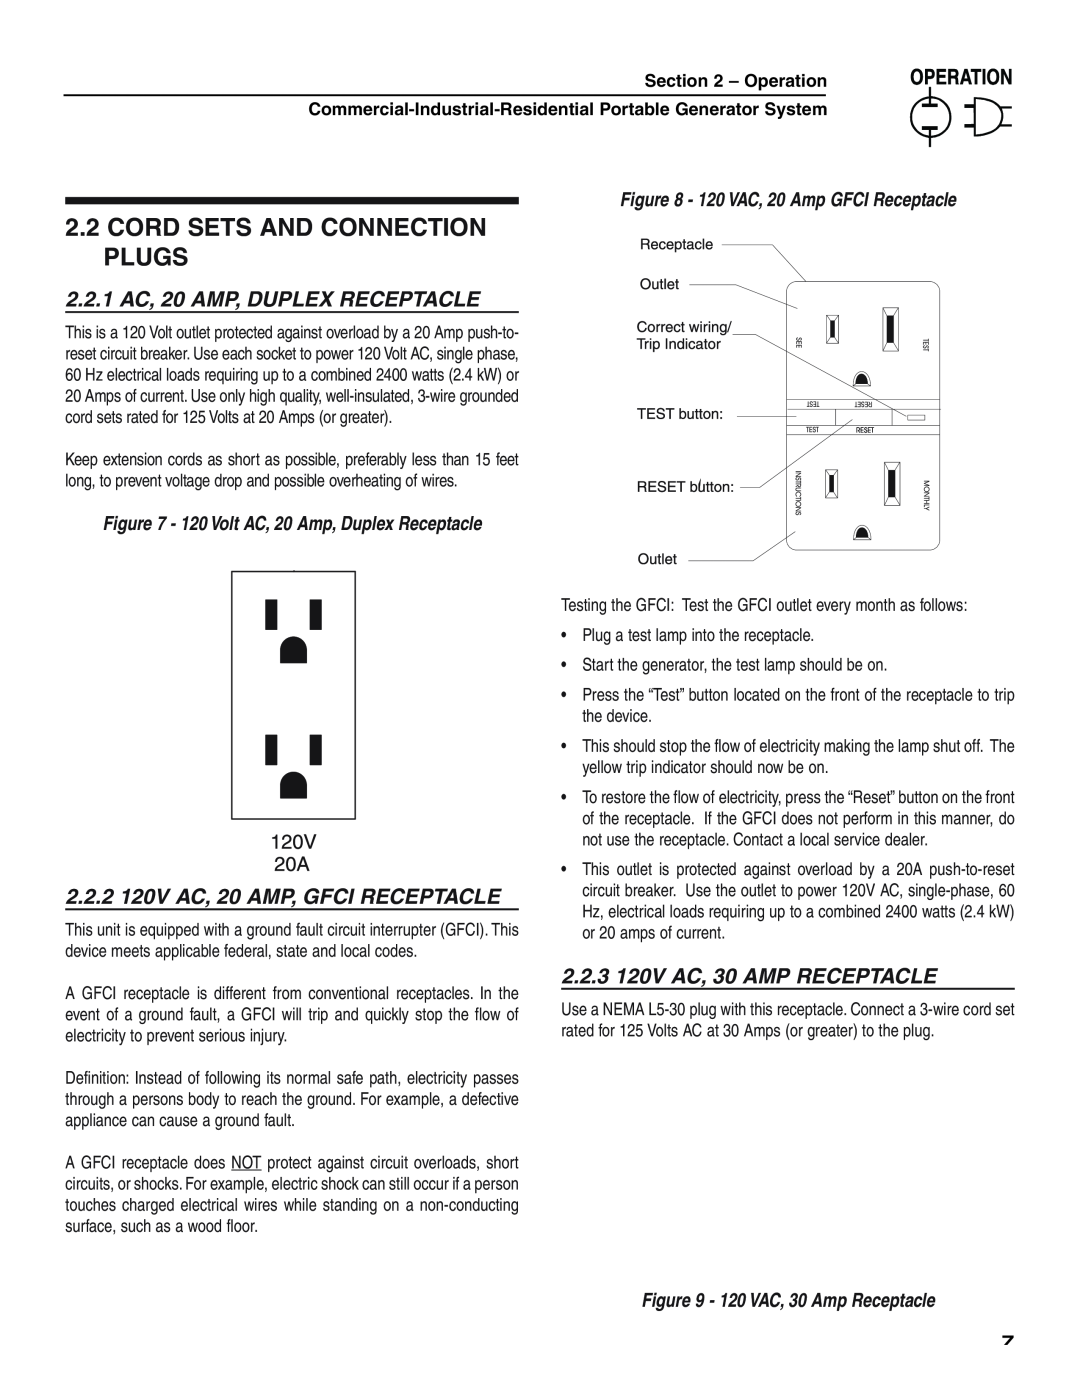 Generac 004451, 004582 Cord Sets And Connection Plugs, 2.2.1 AC, 20 AMP, DUPLEX RECEPTACLE, 120 VAC, 30 Amp Receptacle 